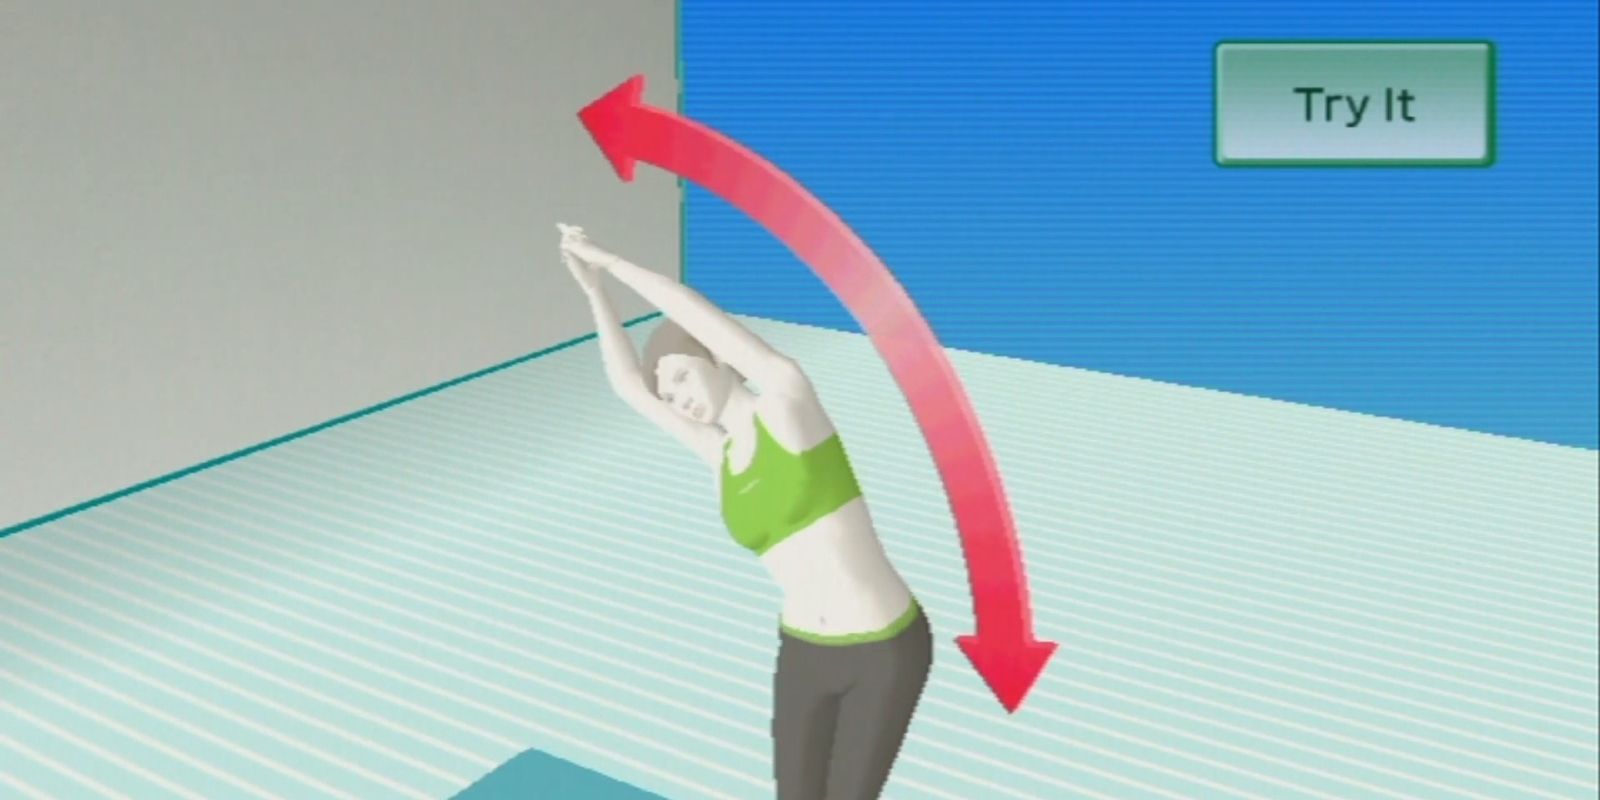 Wii Fit Trainer teaching the player an exercising pose in Wii Fit Plus